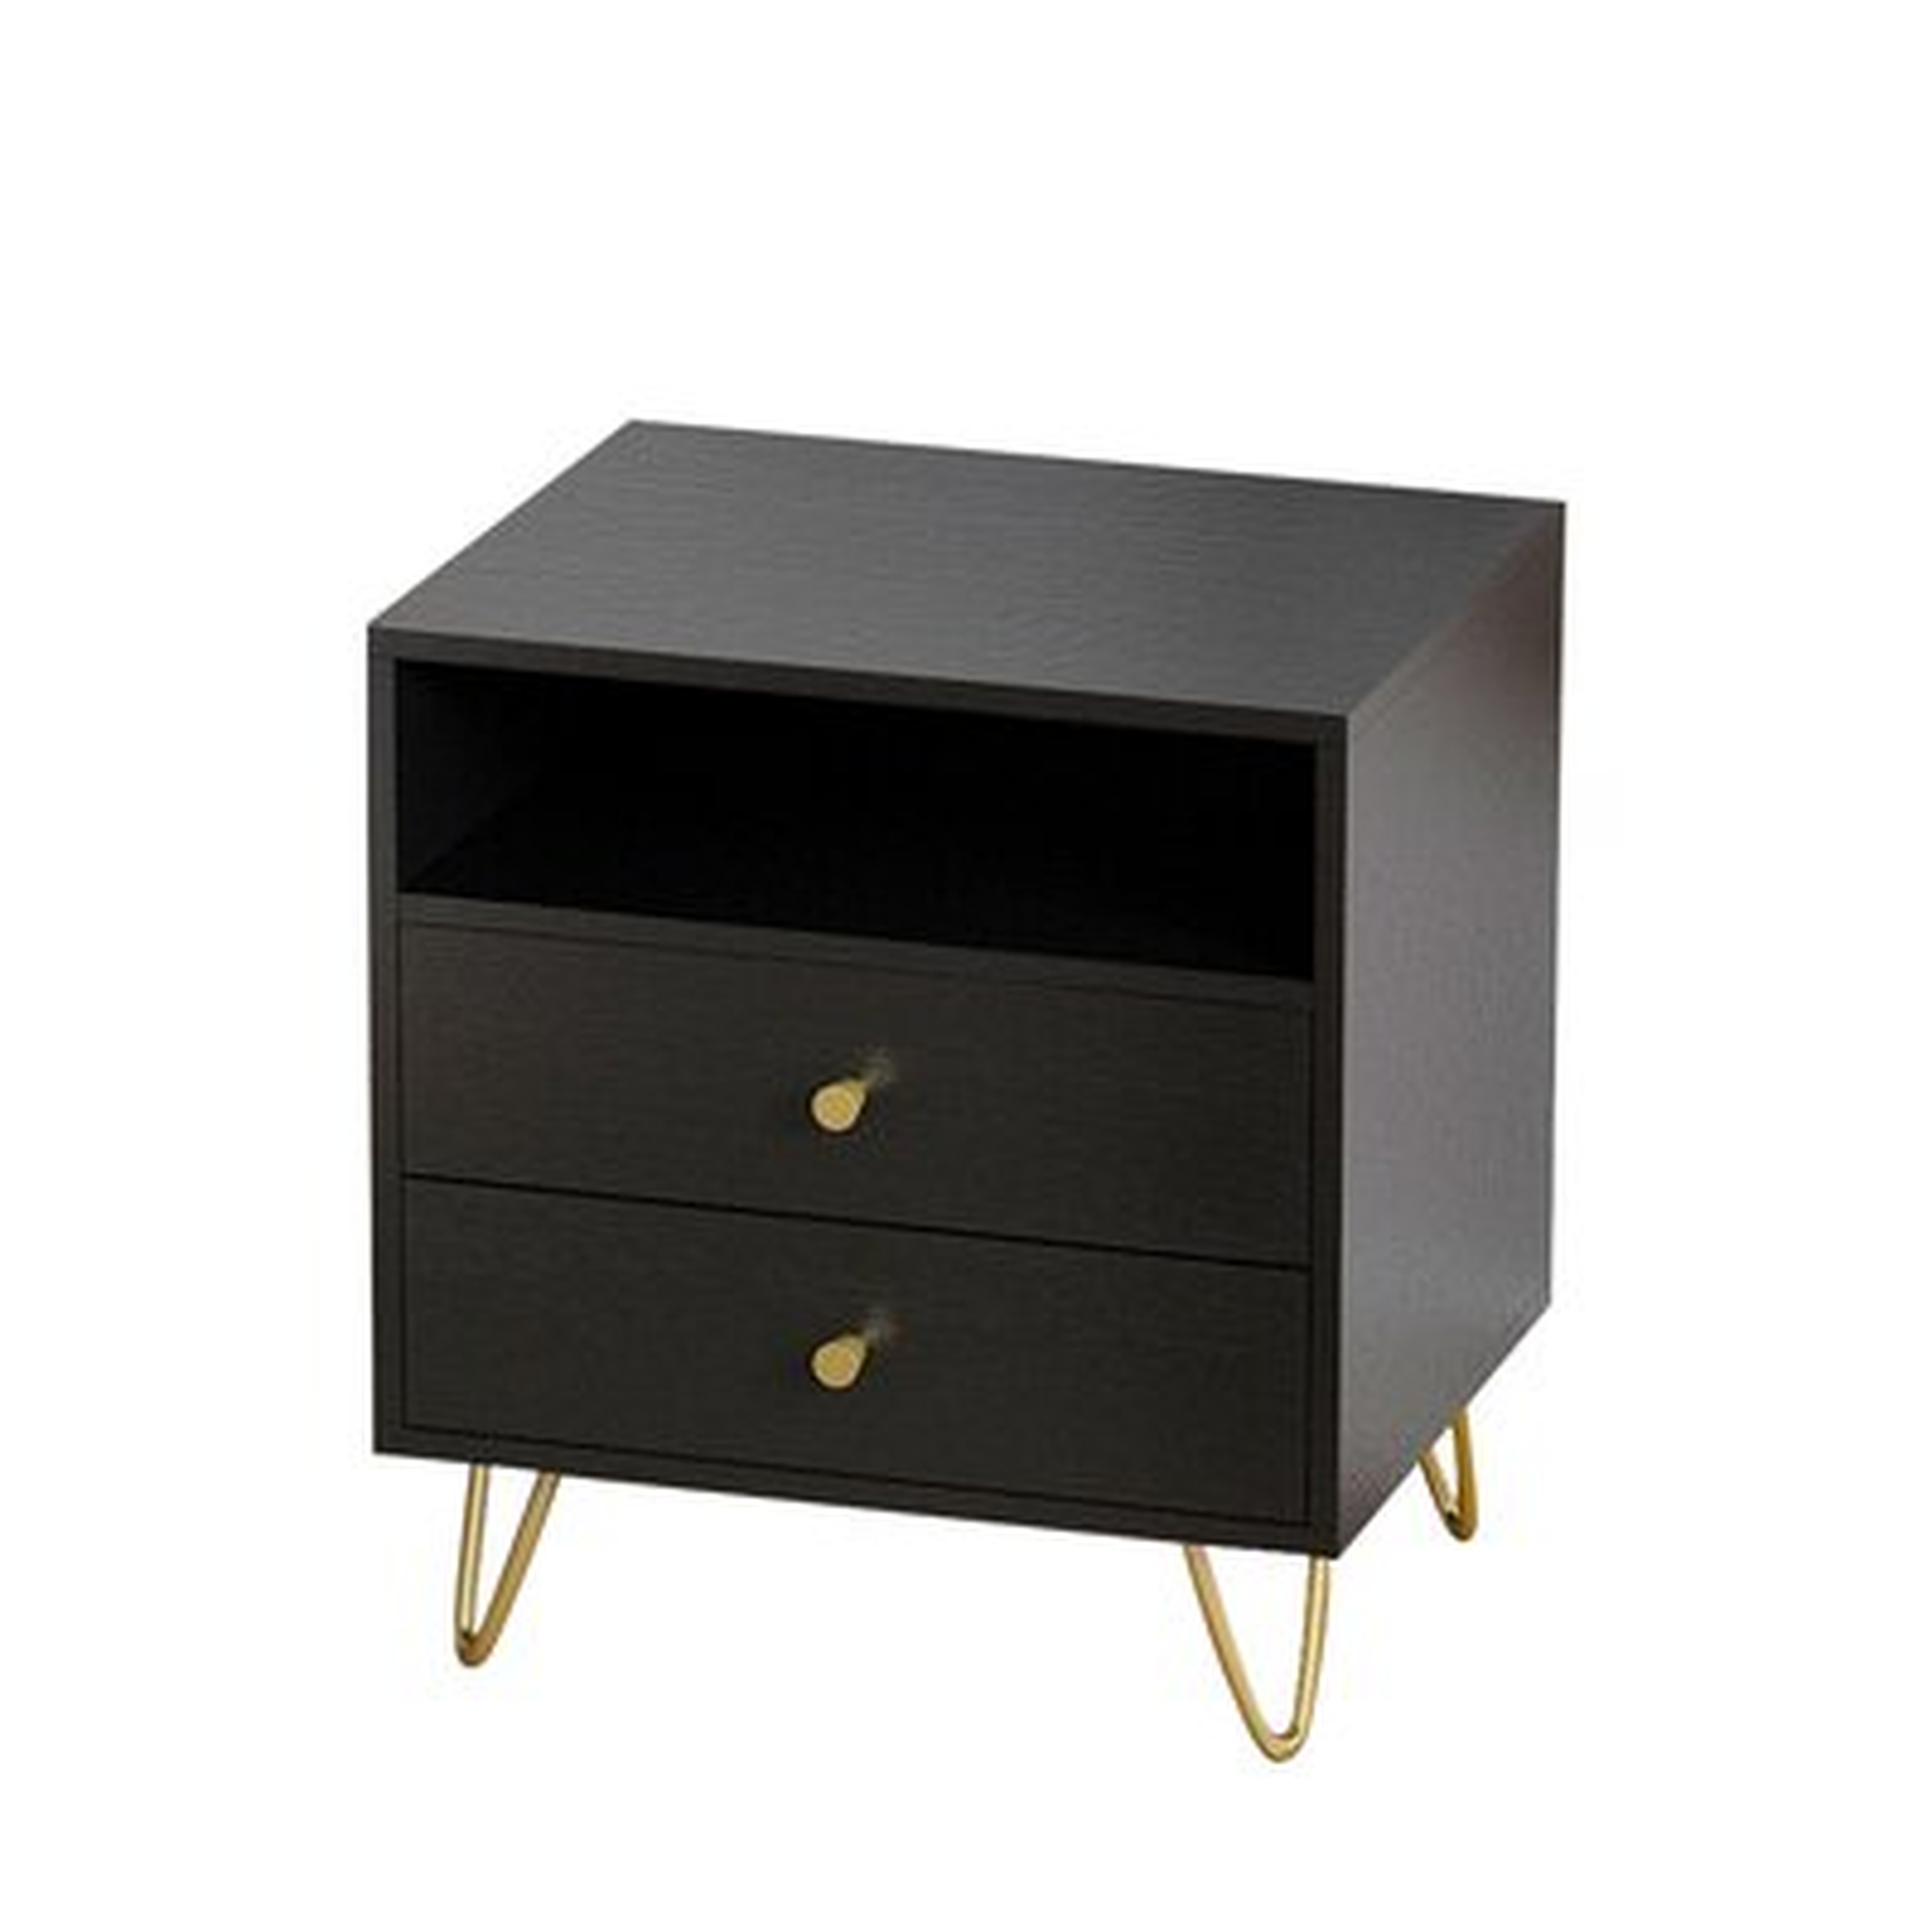 Black Nightstands Set Of 1 Bedside Table With Gold Metal Legs, End Table With 2 Drawers & Shelf For Bedroom - Wayfair